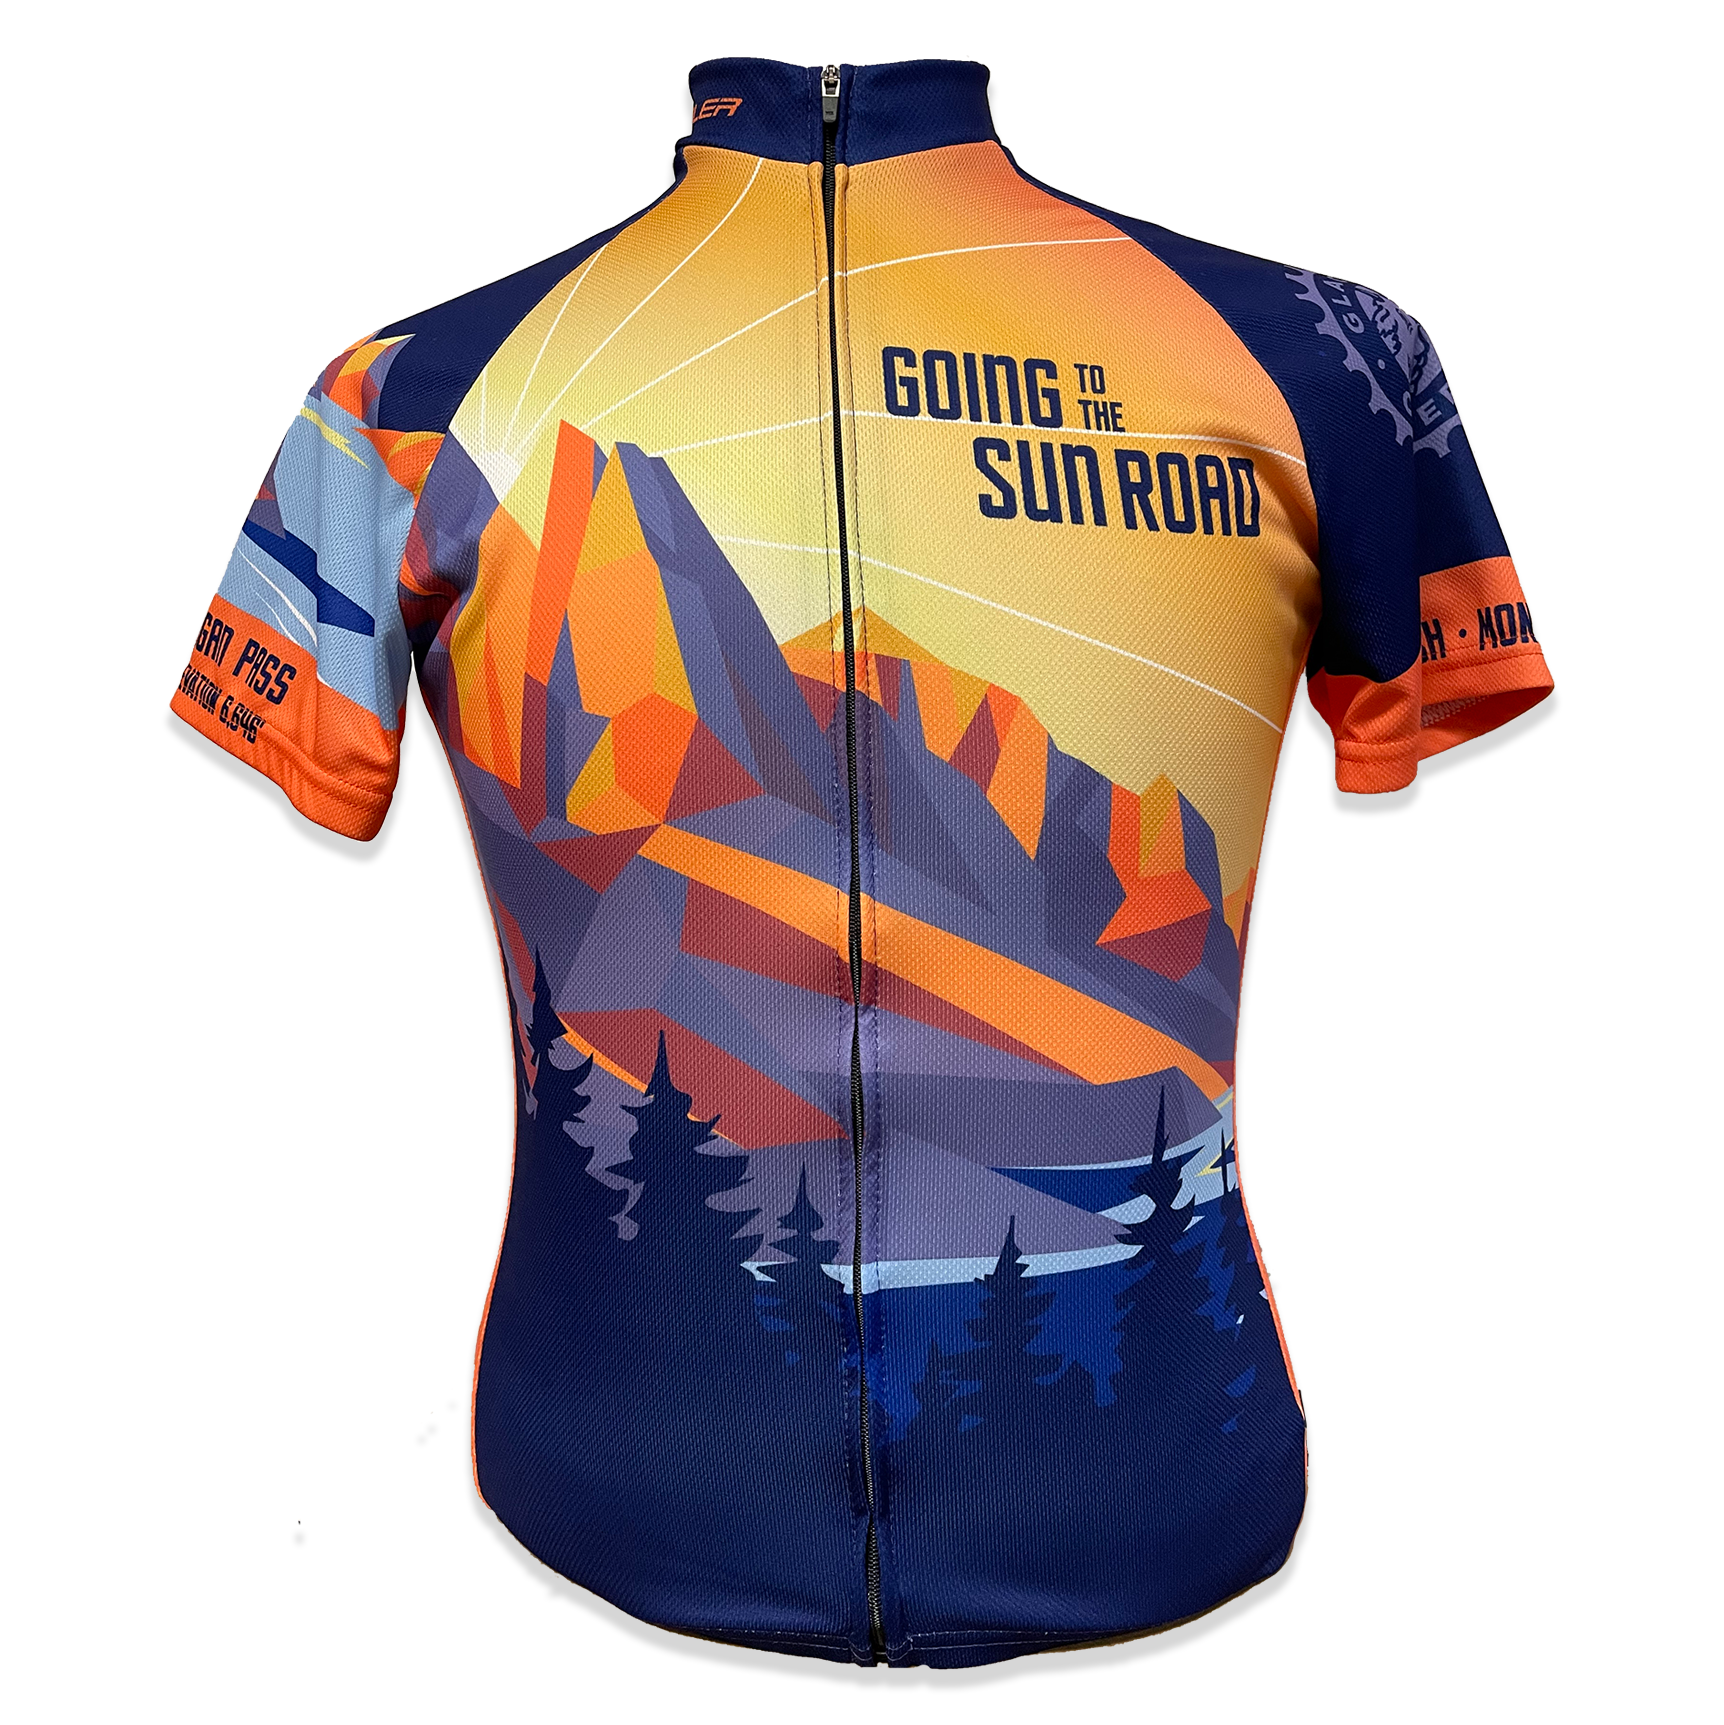 NEW! Mens Going-To-the-Sun Jersey